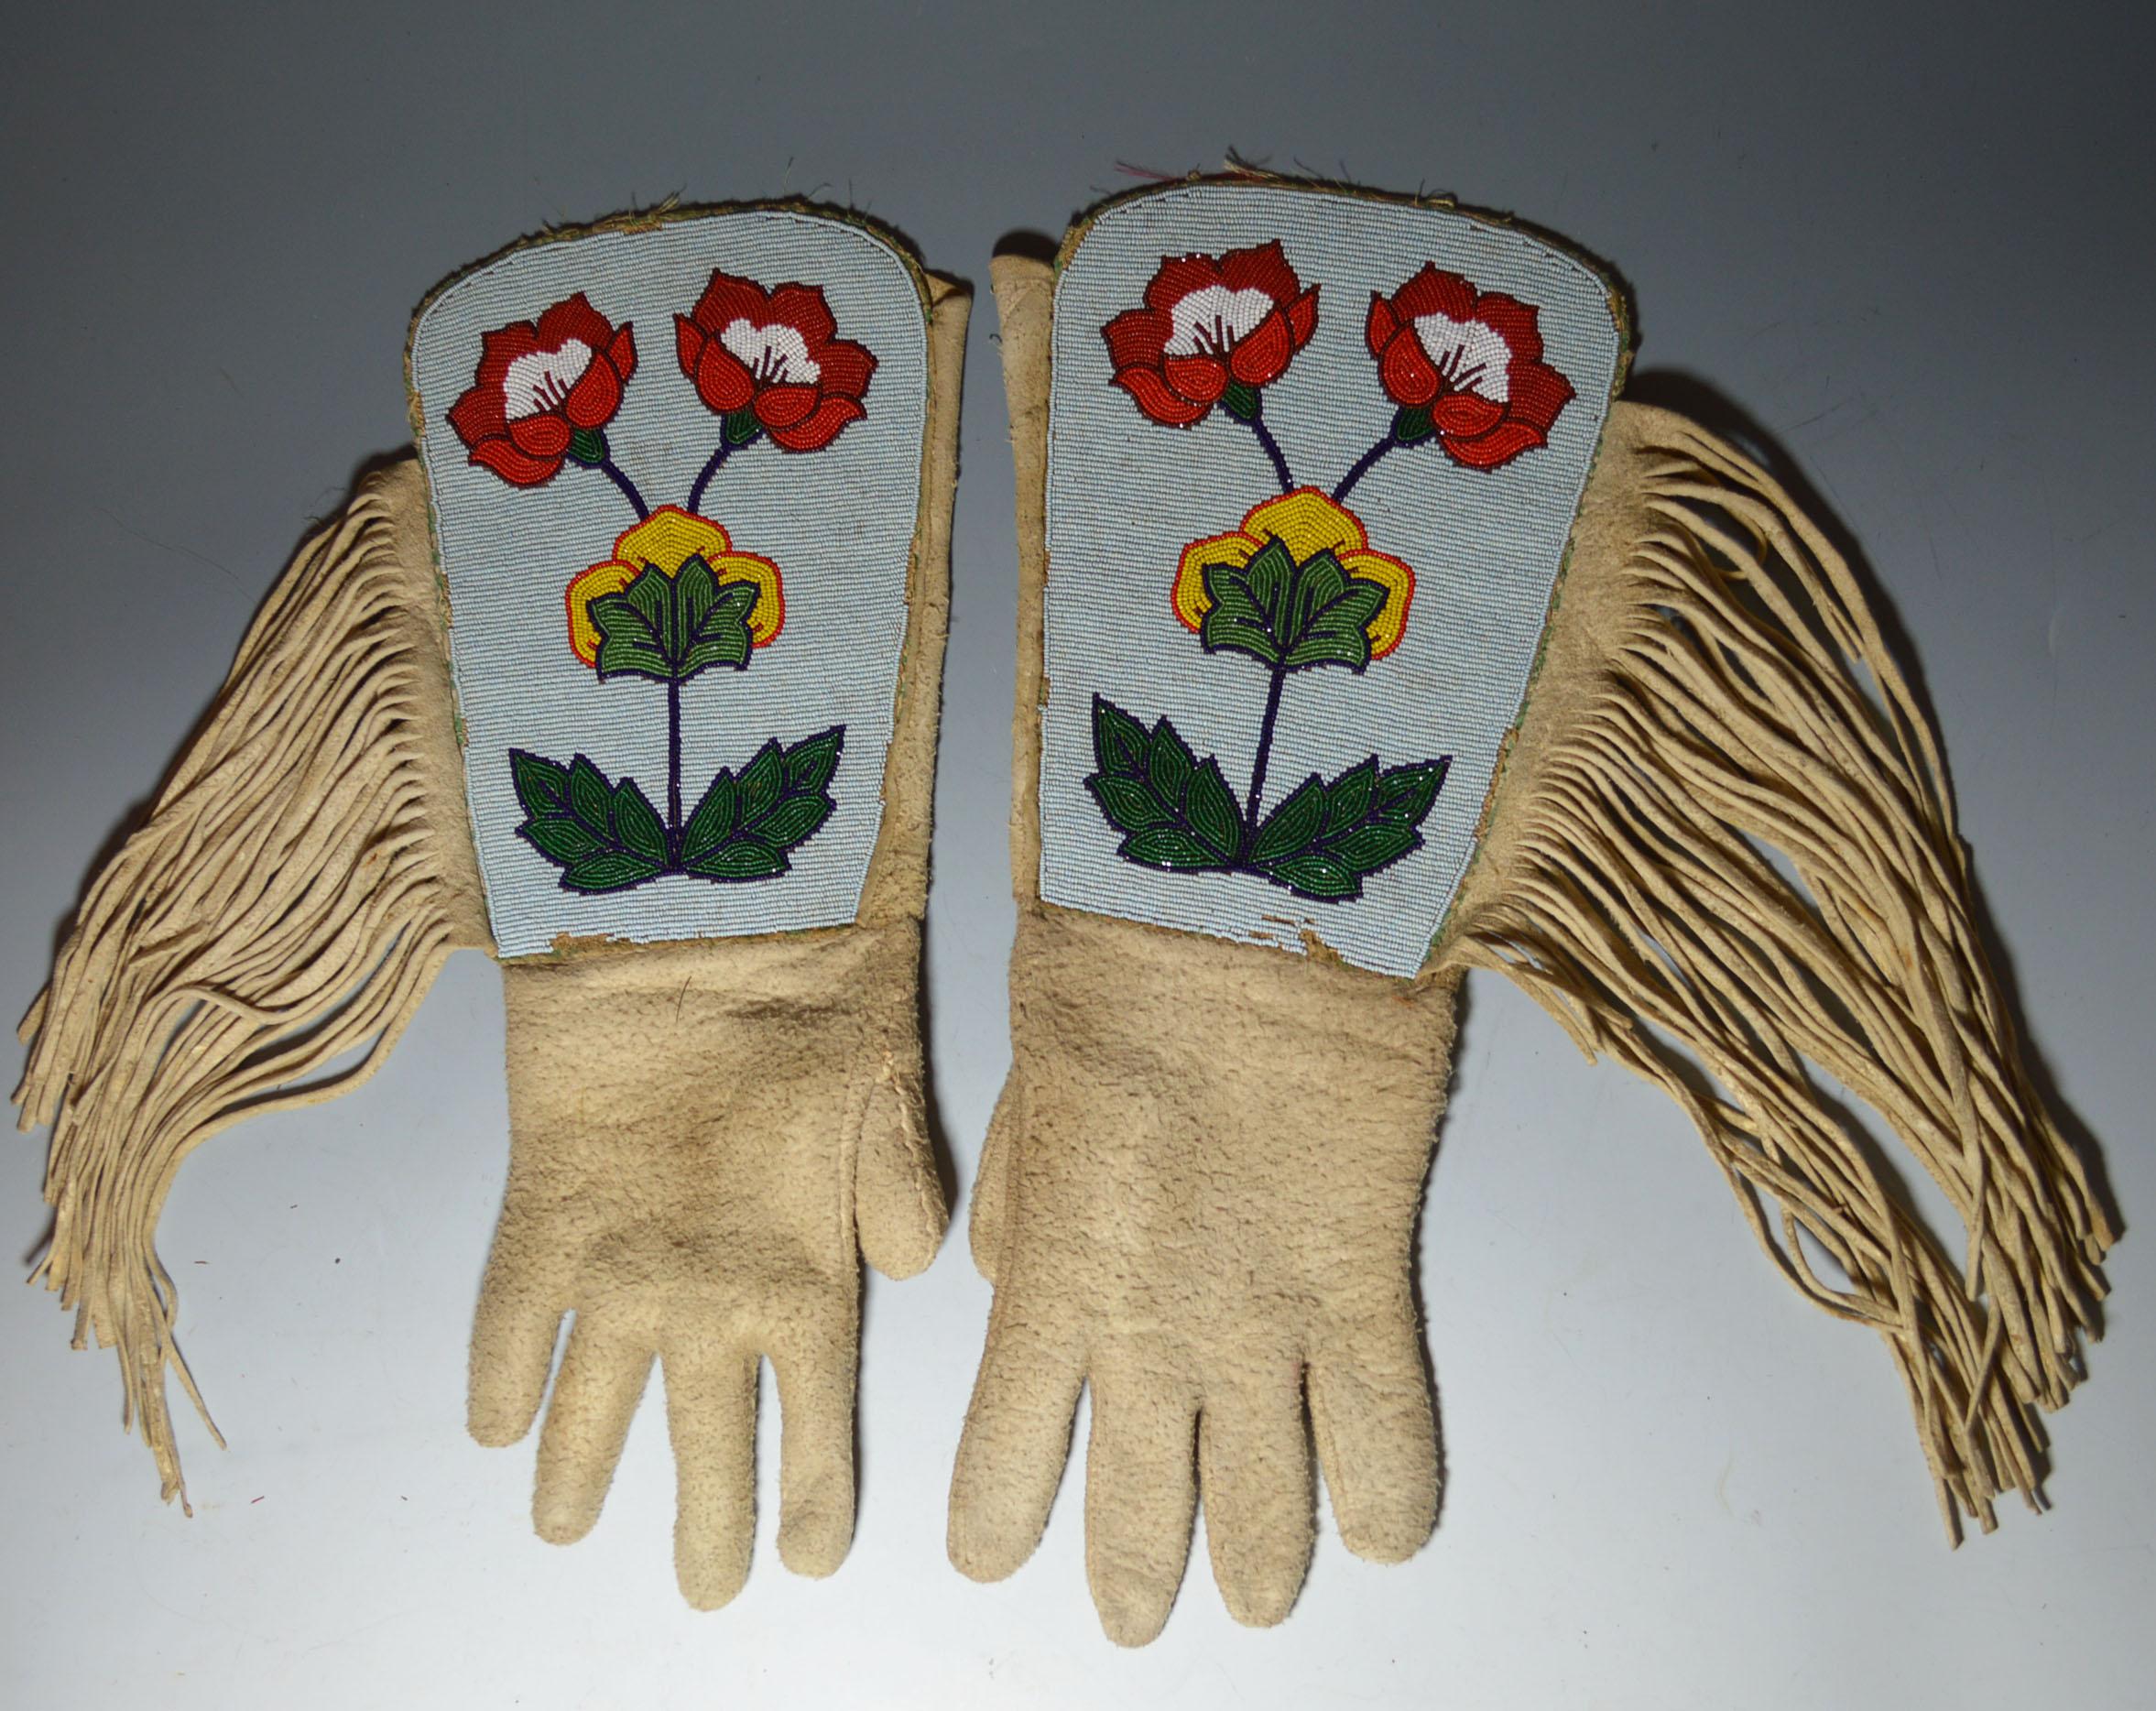 A pair of Native American Crow beaded gauntlets,
buckskin with colored glass beads and cloth interior, 
the cuffs with a floral design in light and dark blue, green, yellow, red and white, 
with a fringe and part cloth lined with printed material
40